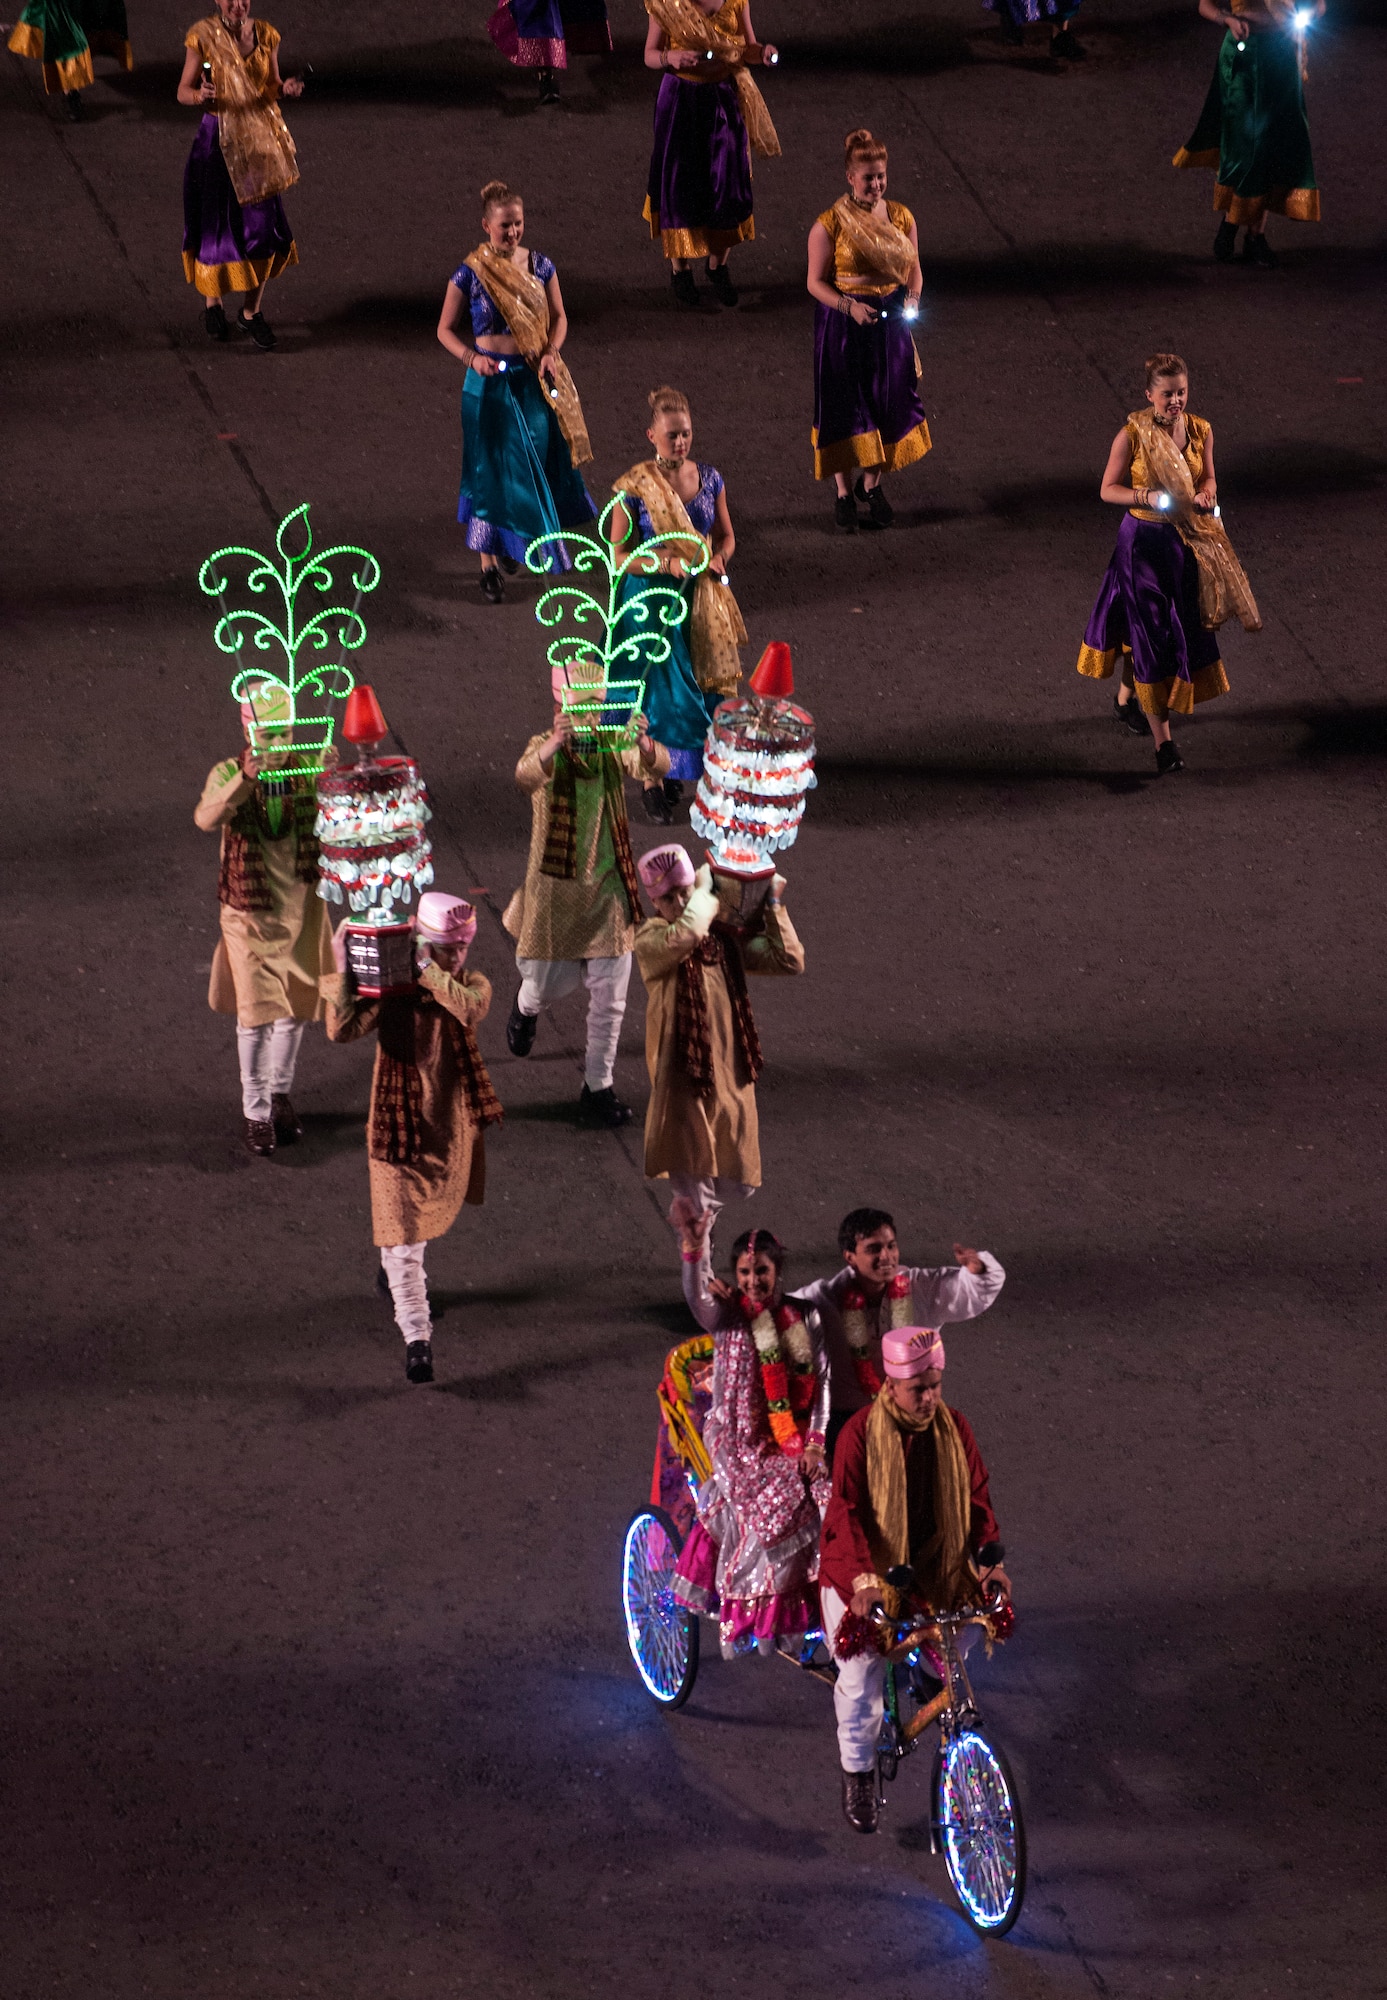 Dancers perform ‘A Bollywood Love Story’ during the Royal Edinburgh Military Tattoo in Edinburgh, Scotland Aug. 12, 2015. More than 12 Bollywood dancers joined dancers from around the world to perform during the 66th production of the tattoo. Since 1950, more than 14 million visitors have attended the tattoo in the Castle esplanade. (U.S. Air Force photo/Staff Sgt. Nichelle Anderson/released)